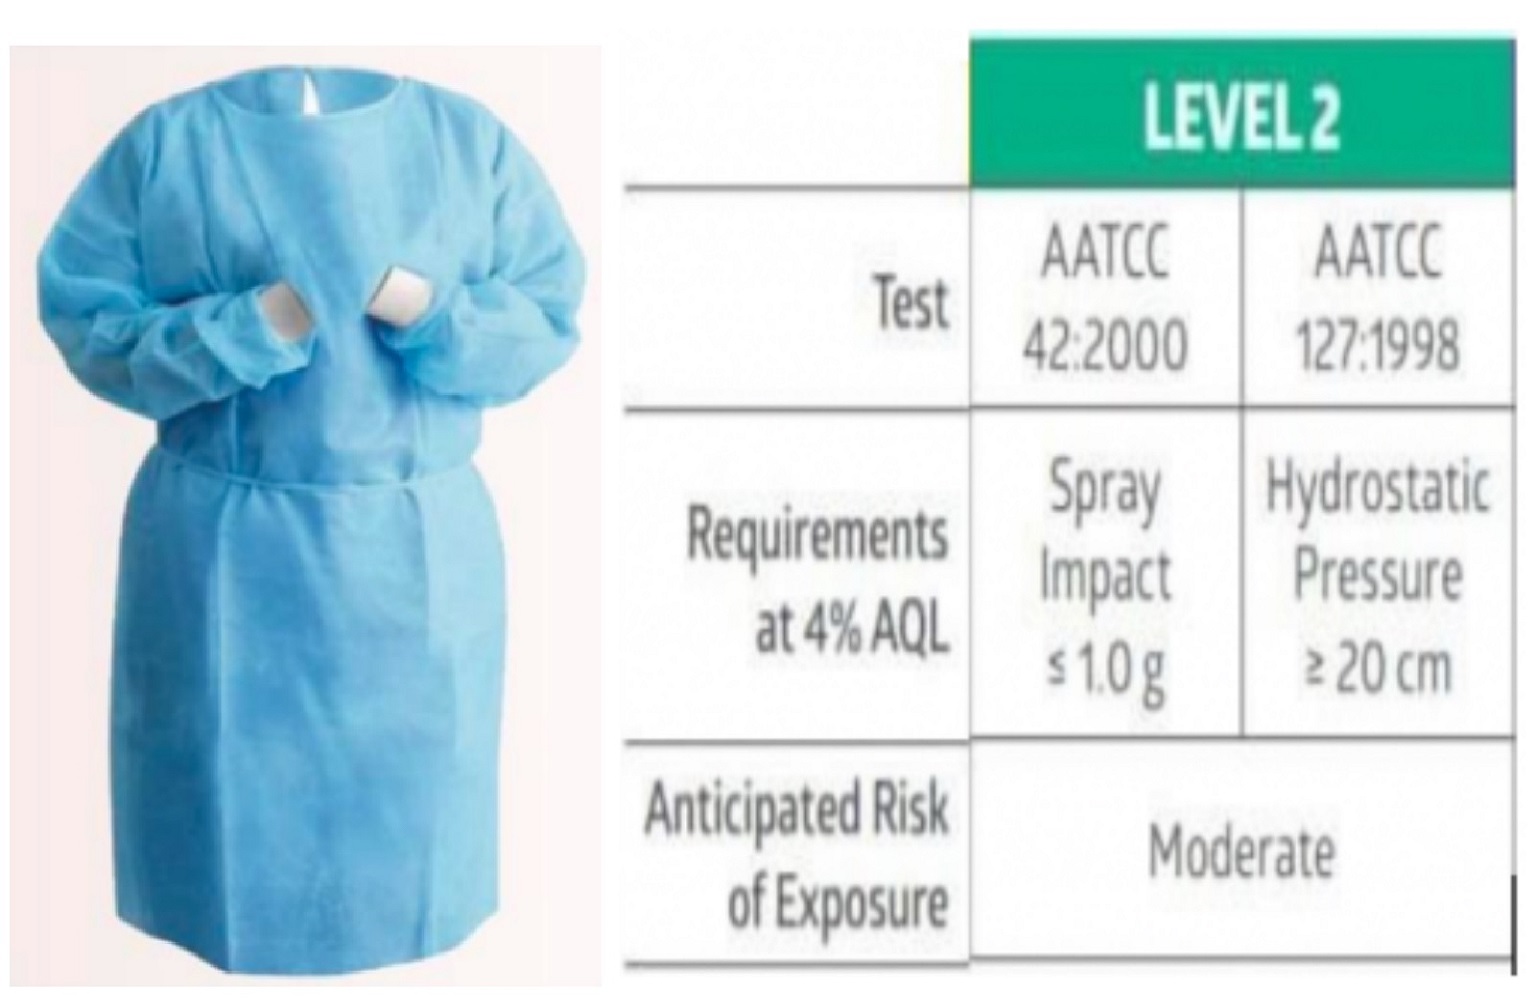 Non-Isolation Gown (Level 2)